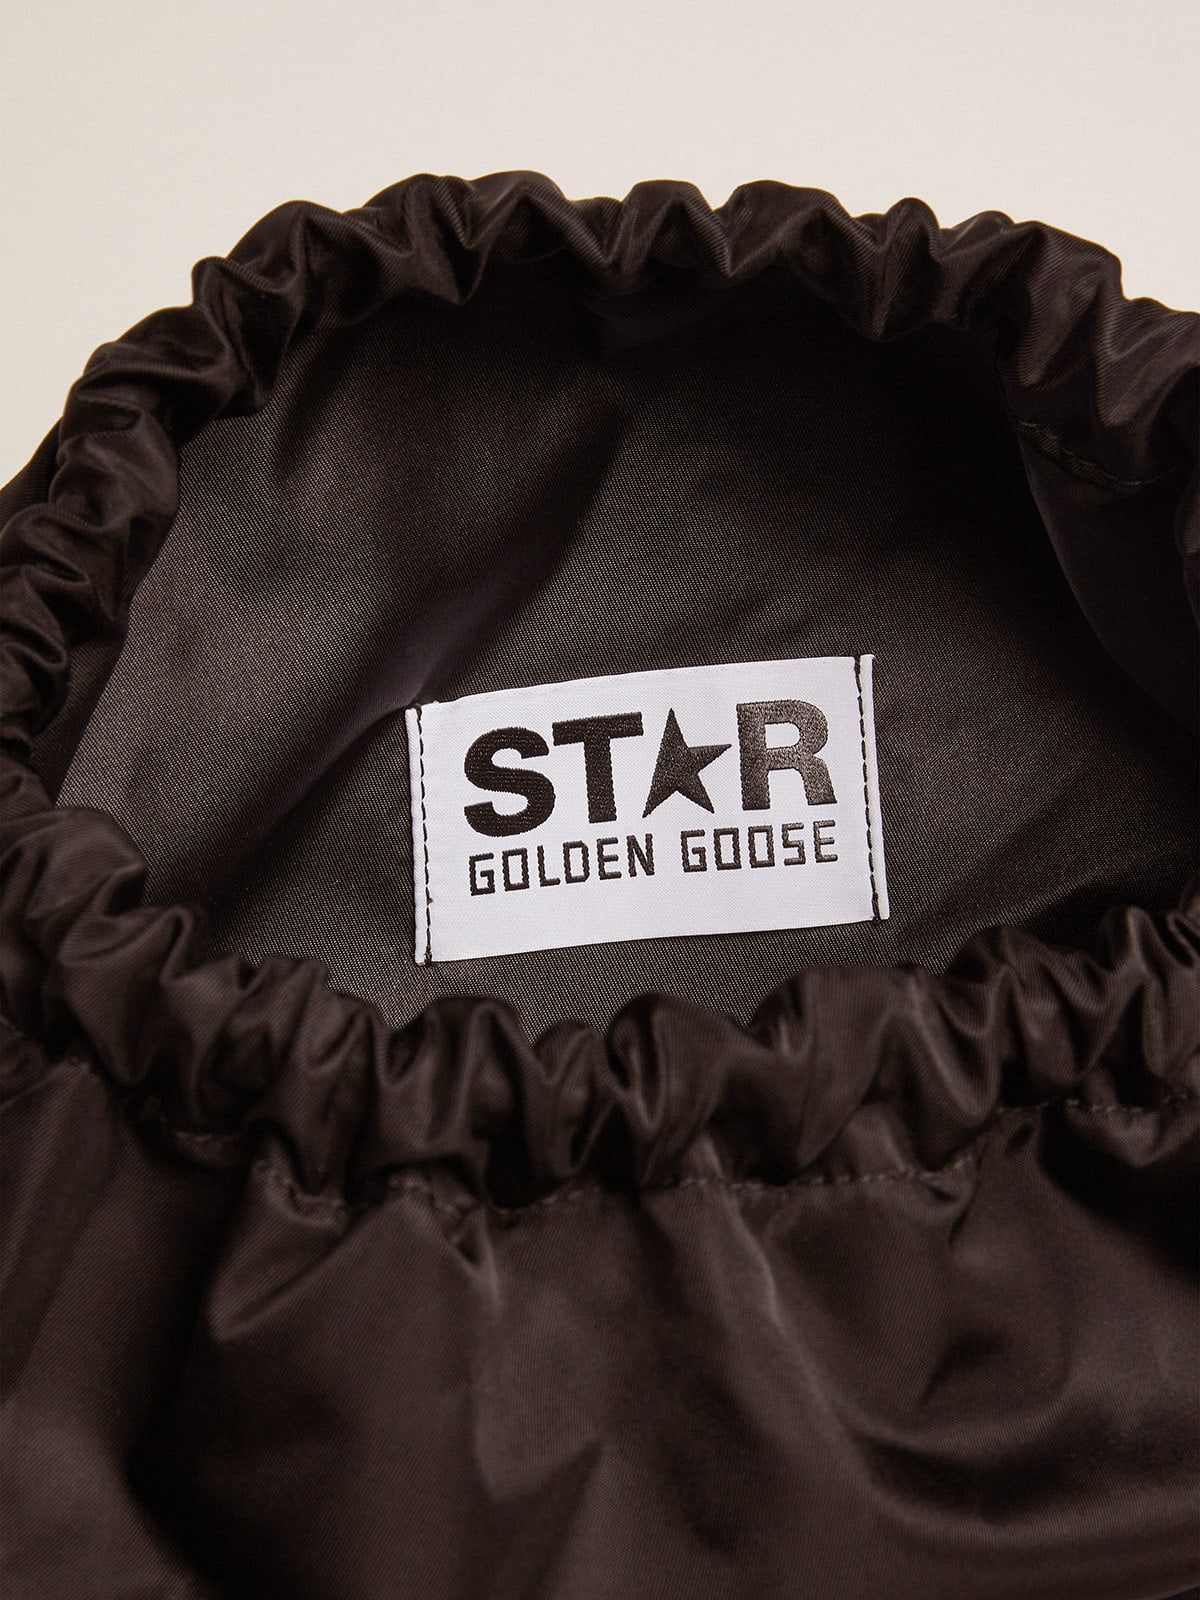 Golden Goose - Star Collection backpack in black nylon with drawstring fastening in 